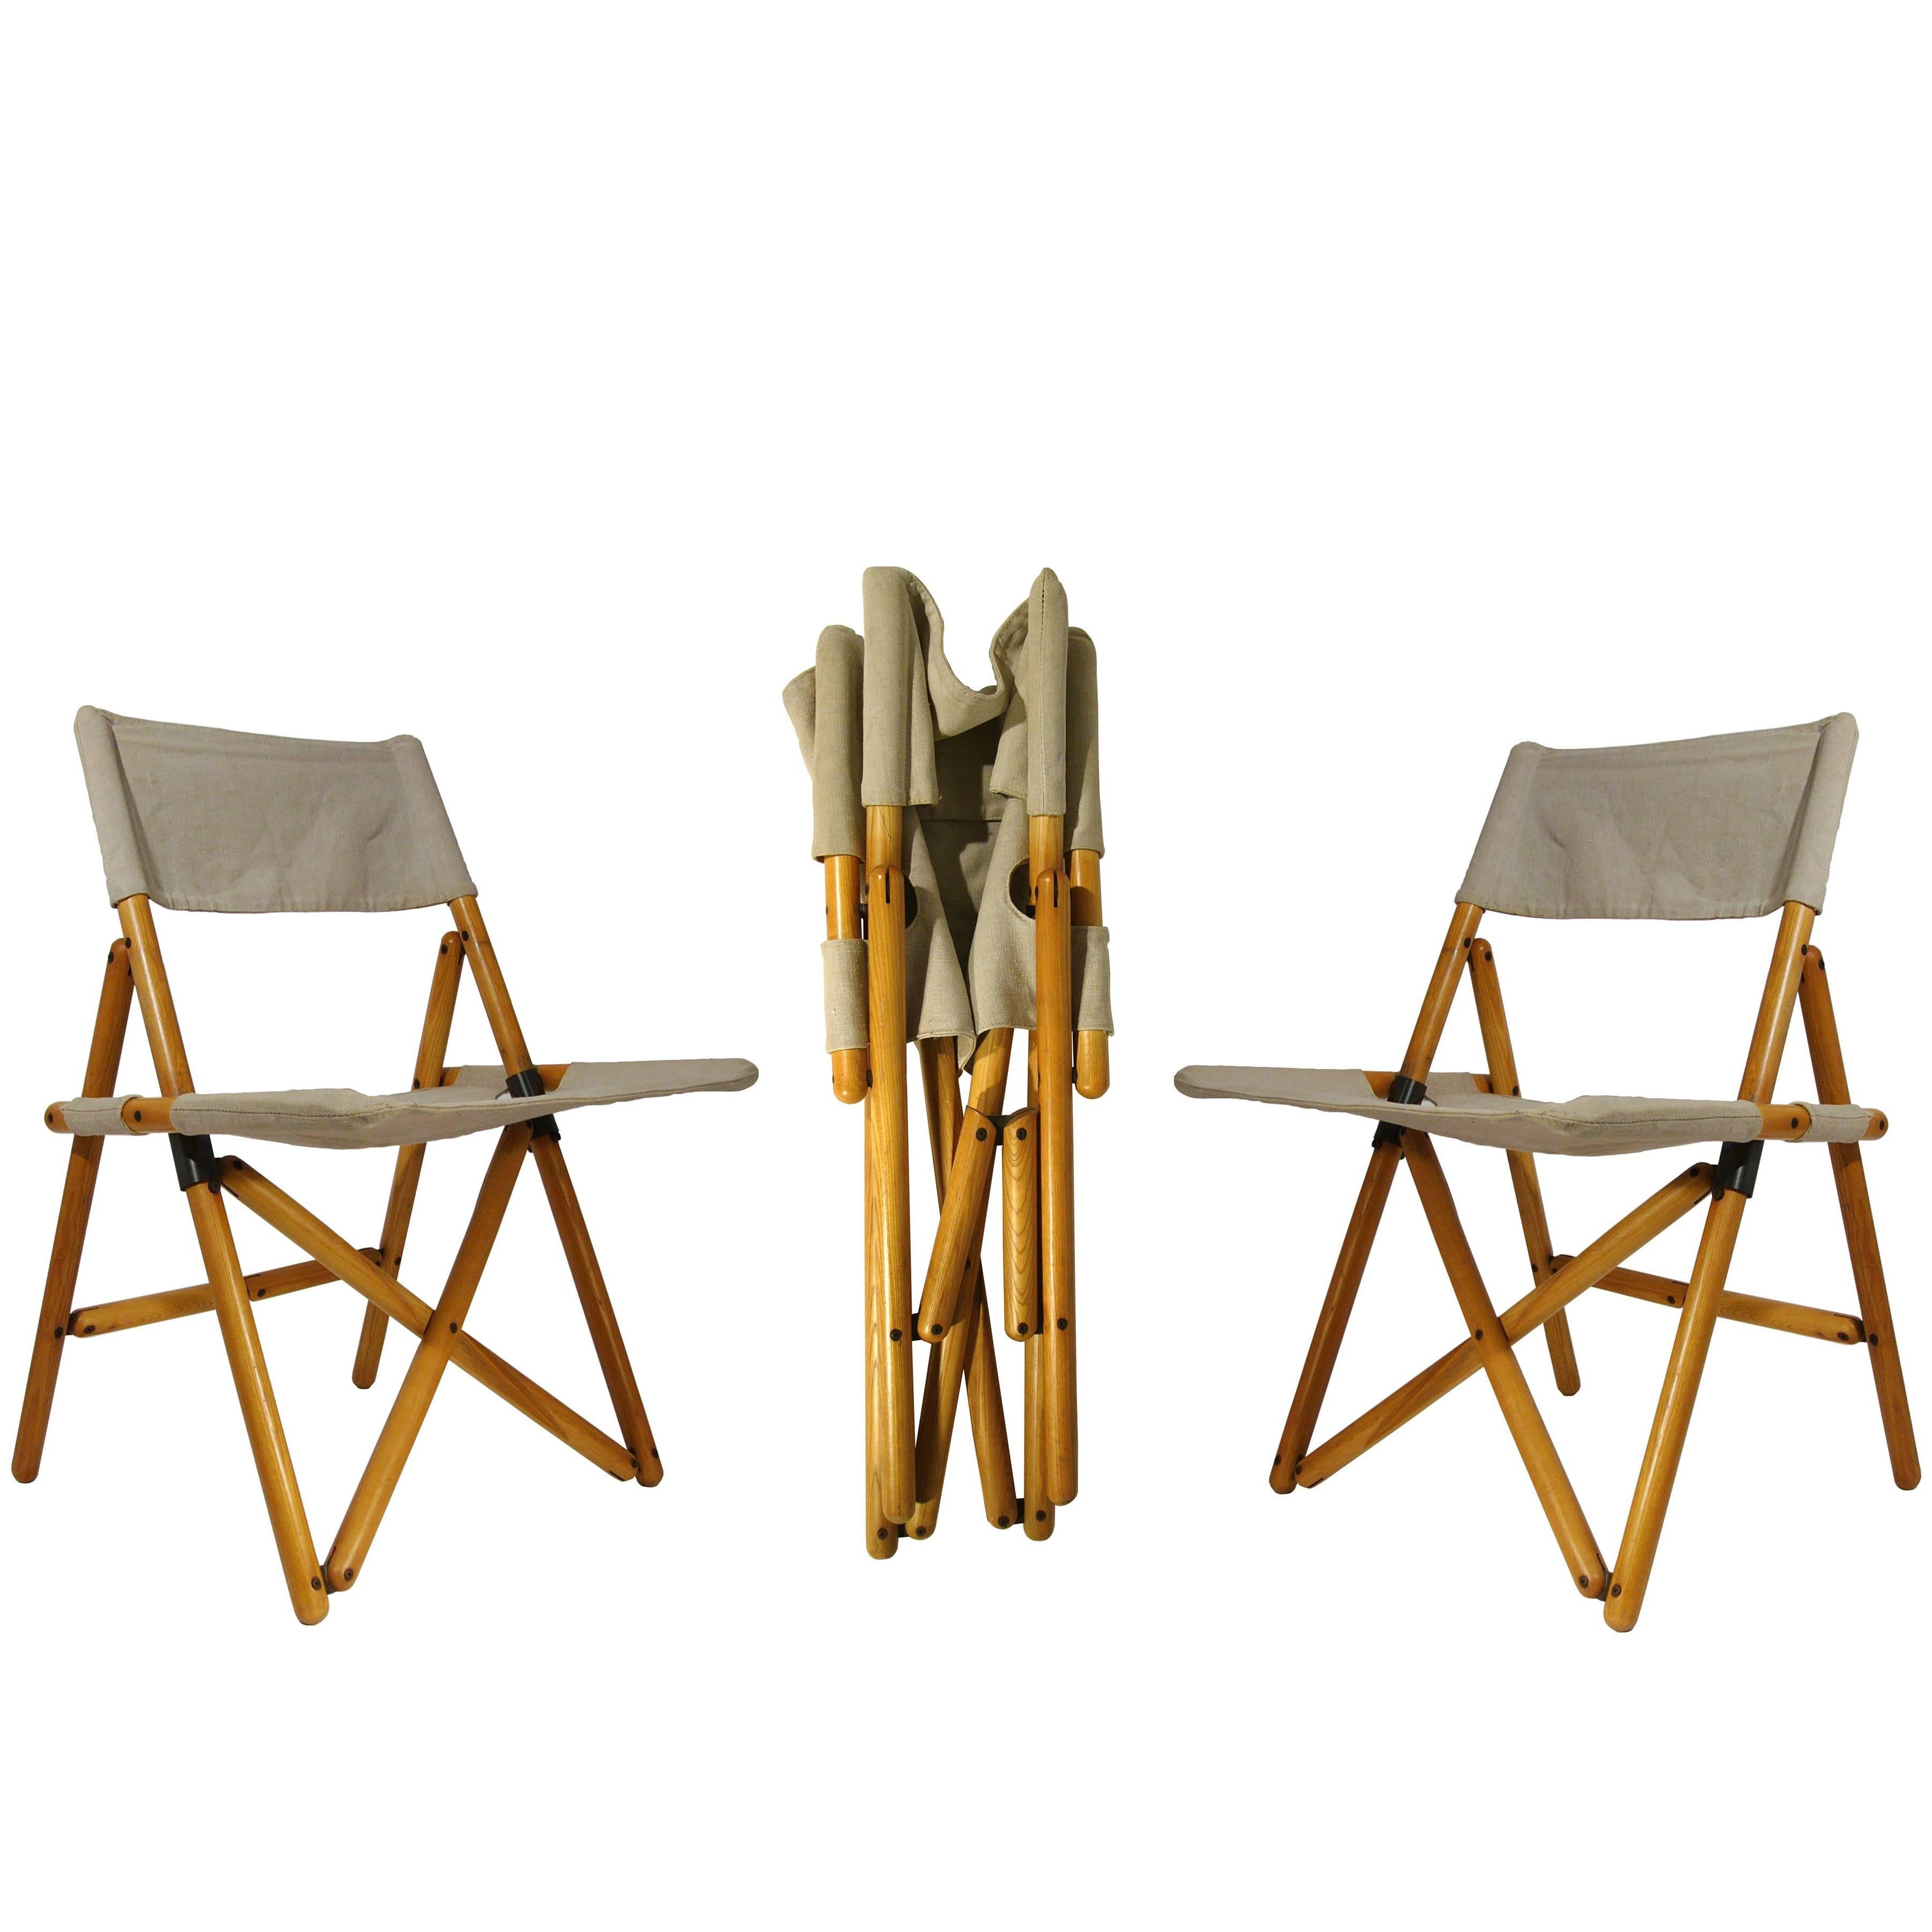 Wood and Flax "Navy" Folding Chairs by Sergio Asti for Zanotta, 1969